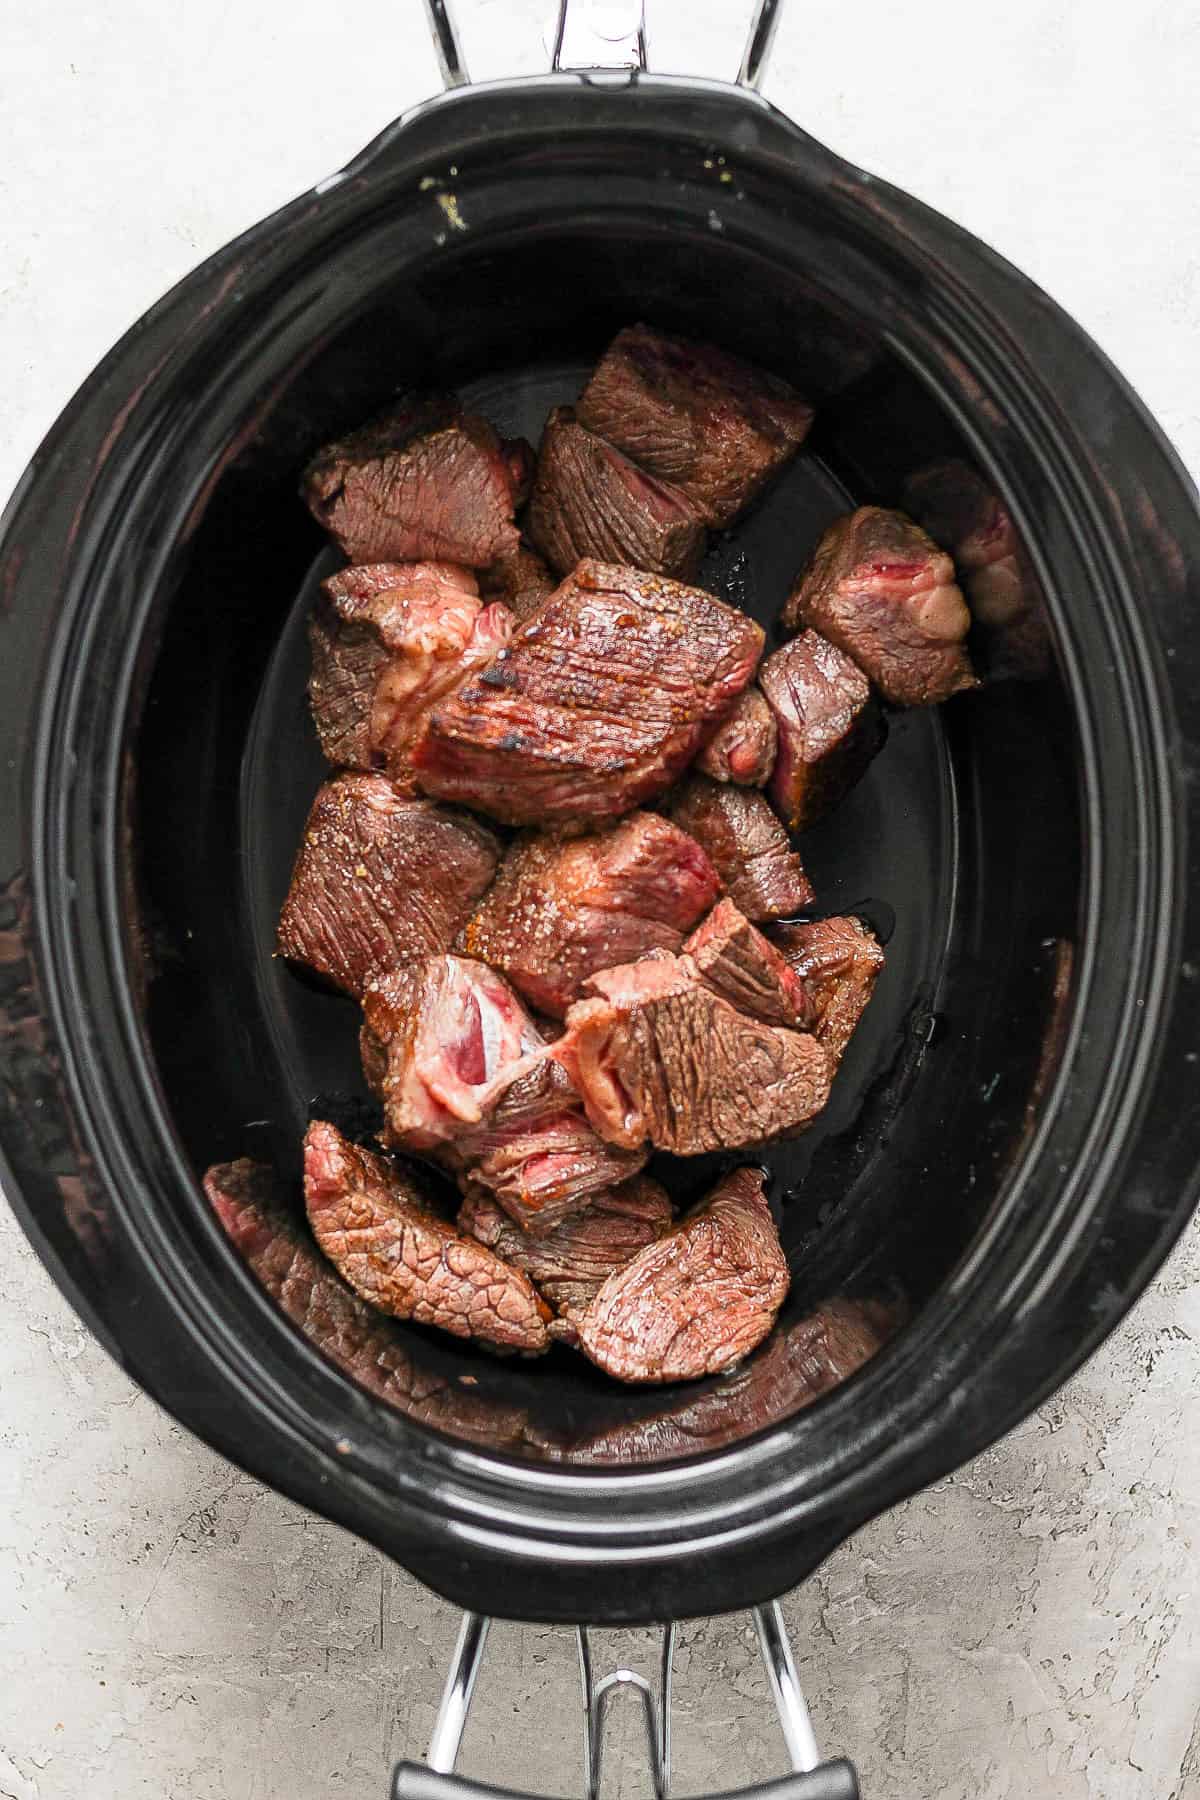 Cooked beef inside the crockpot